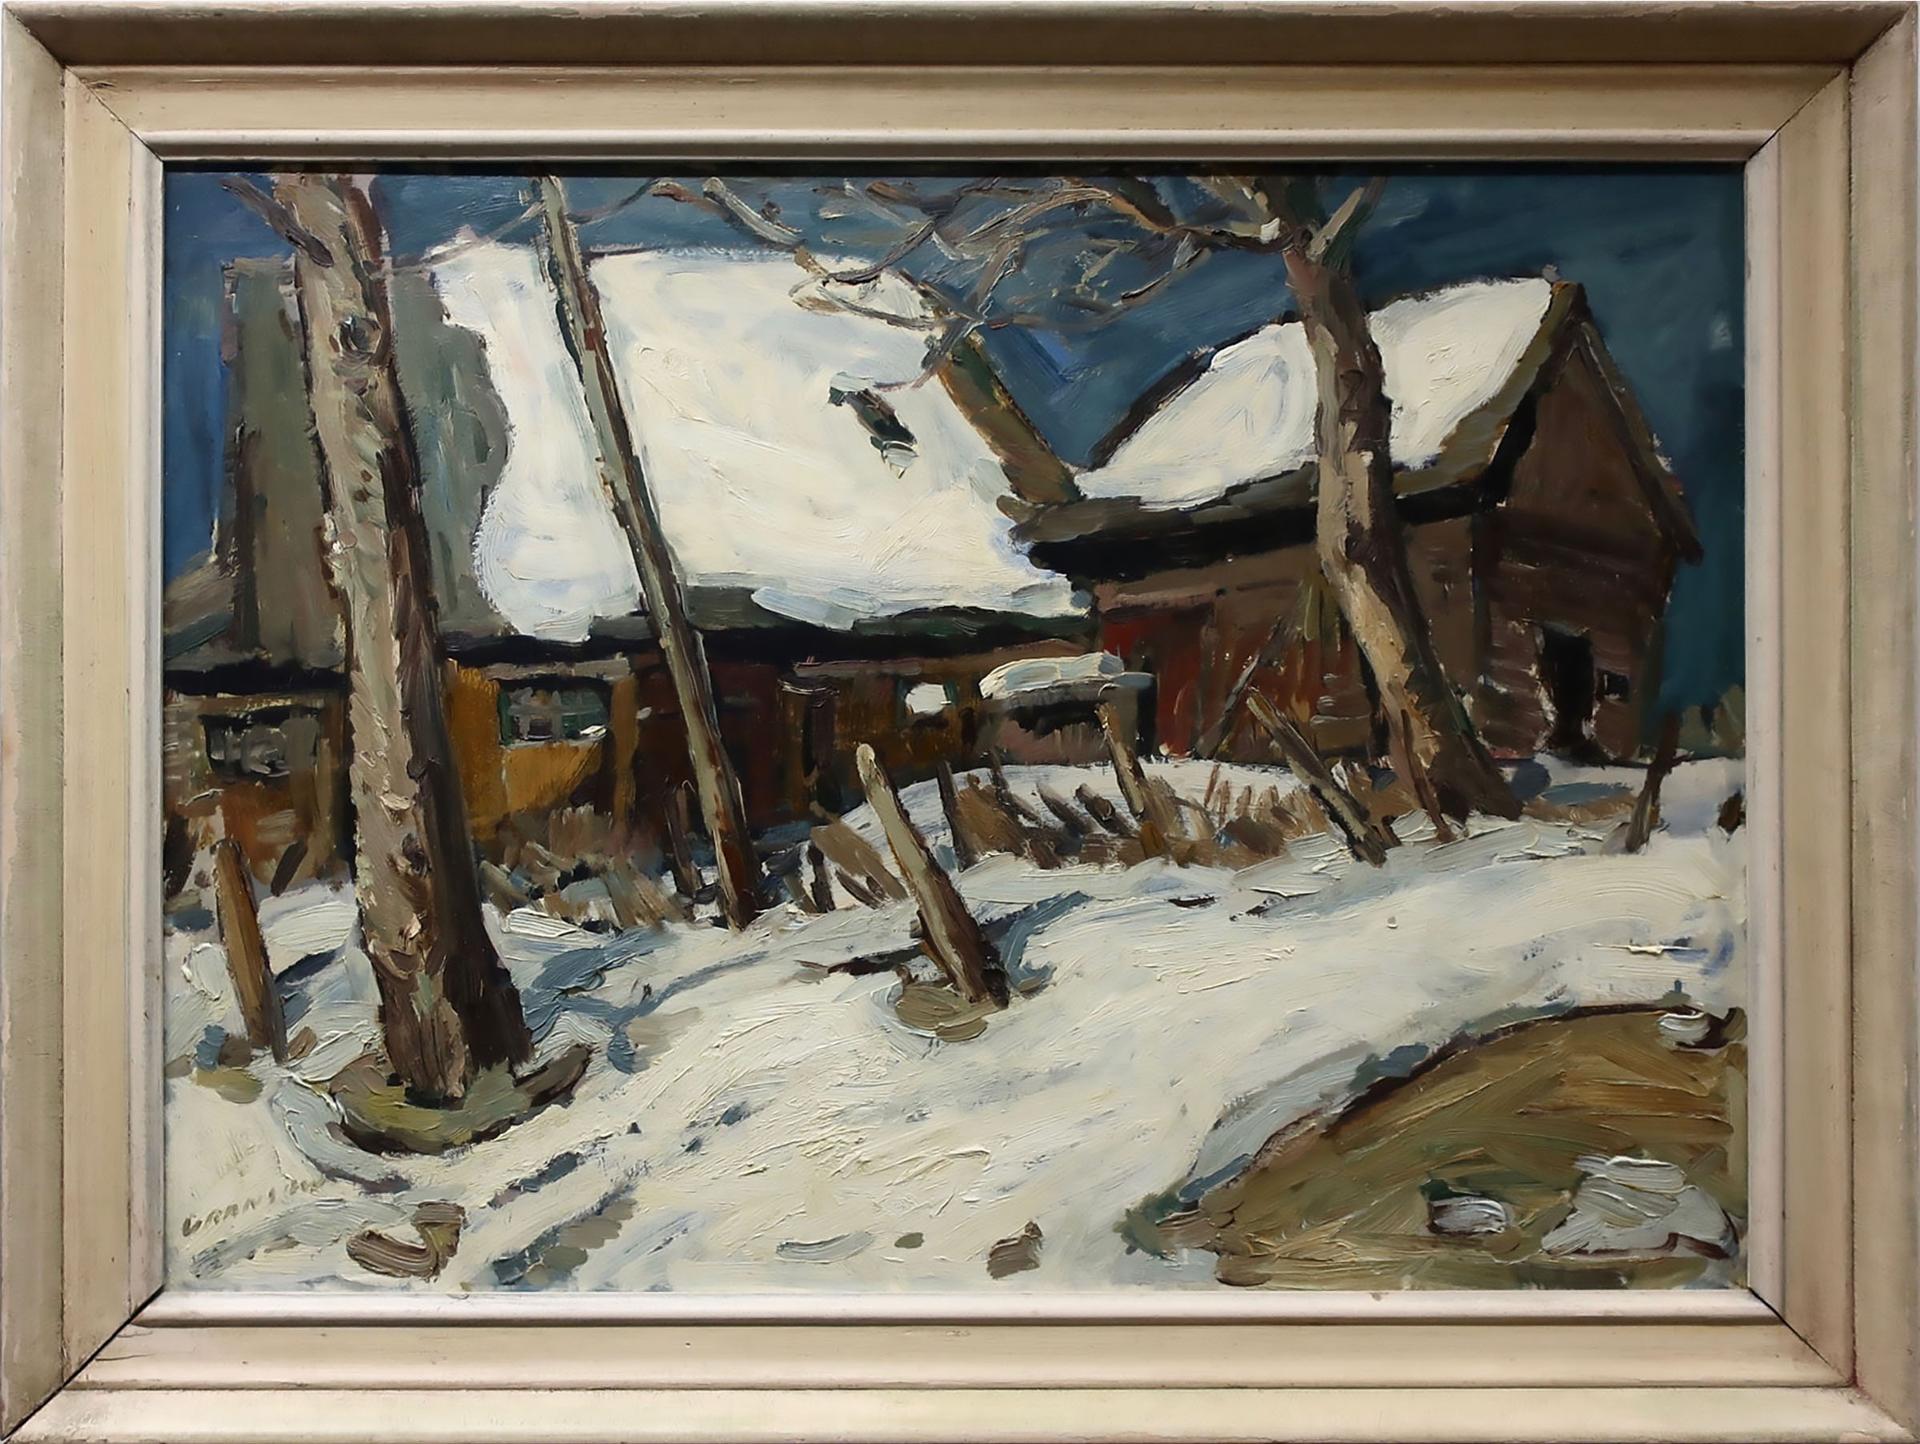 Helmut Gransow (1921-2012) - Two Barns In Snow